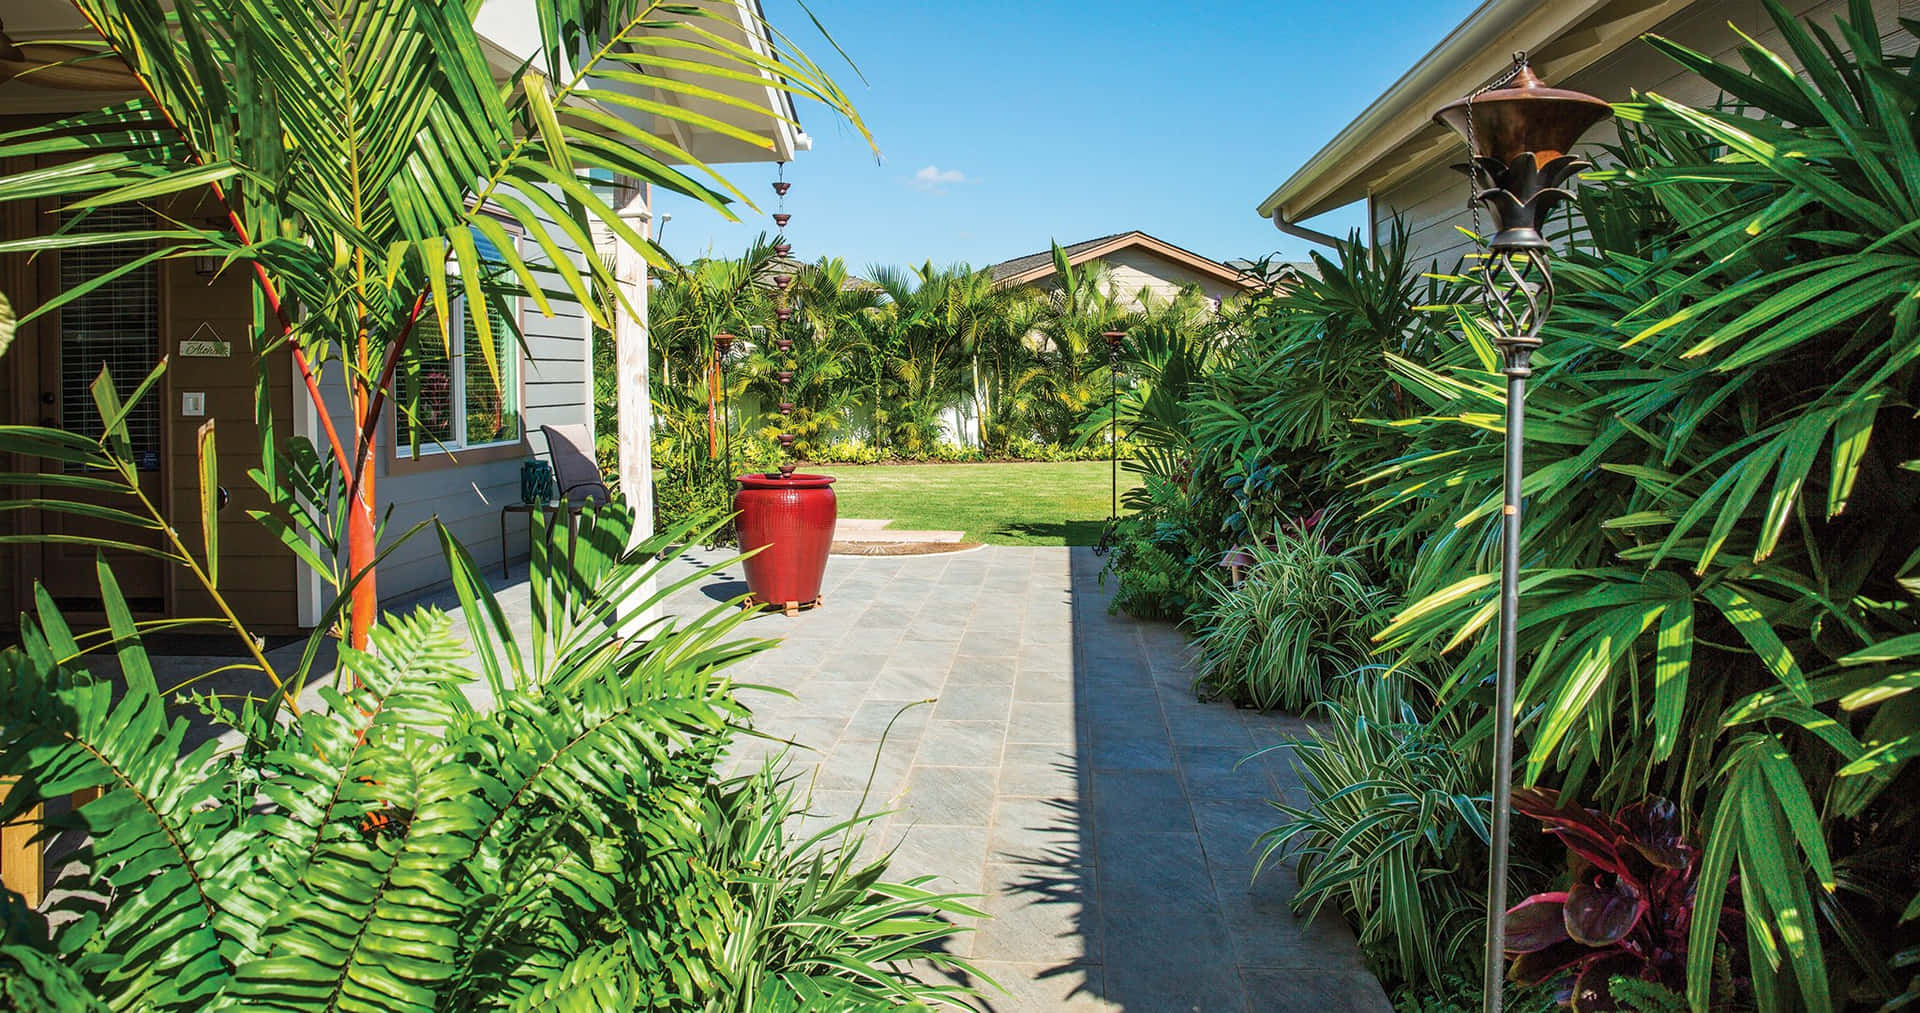 Experience serenity and relaxation with a lush green palm tree